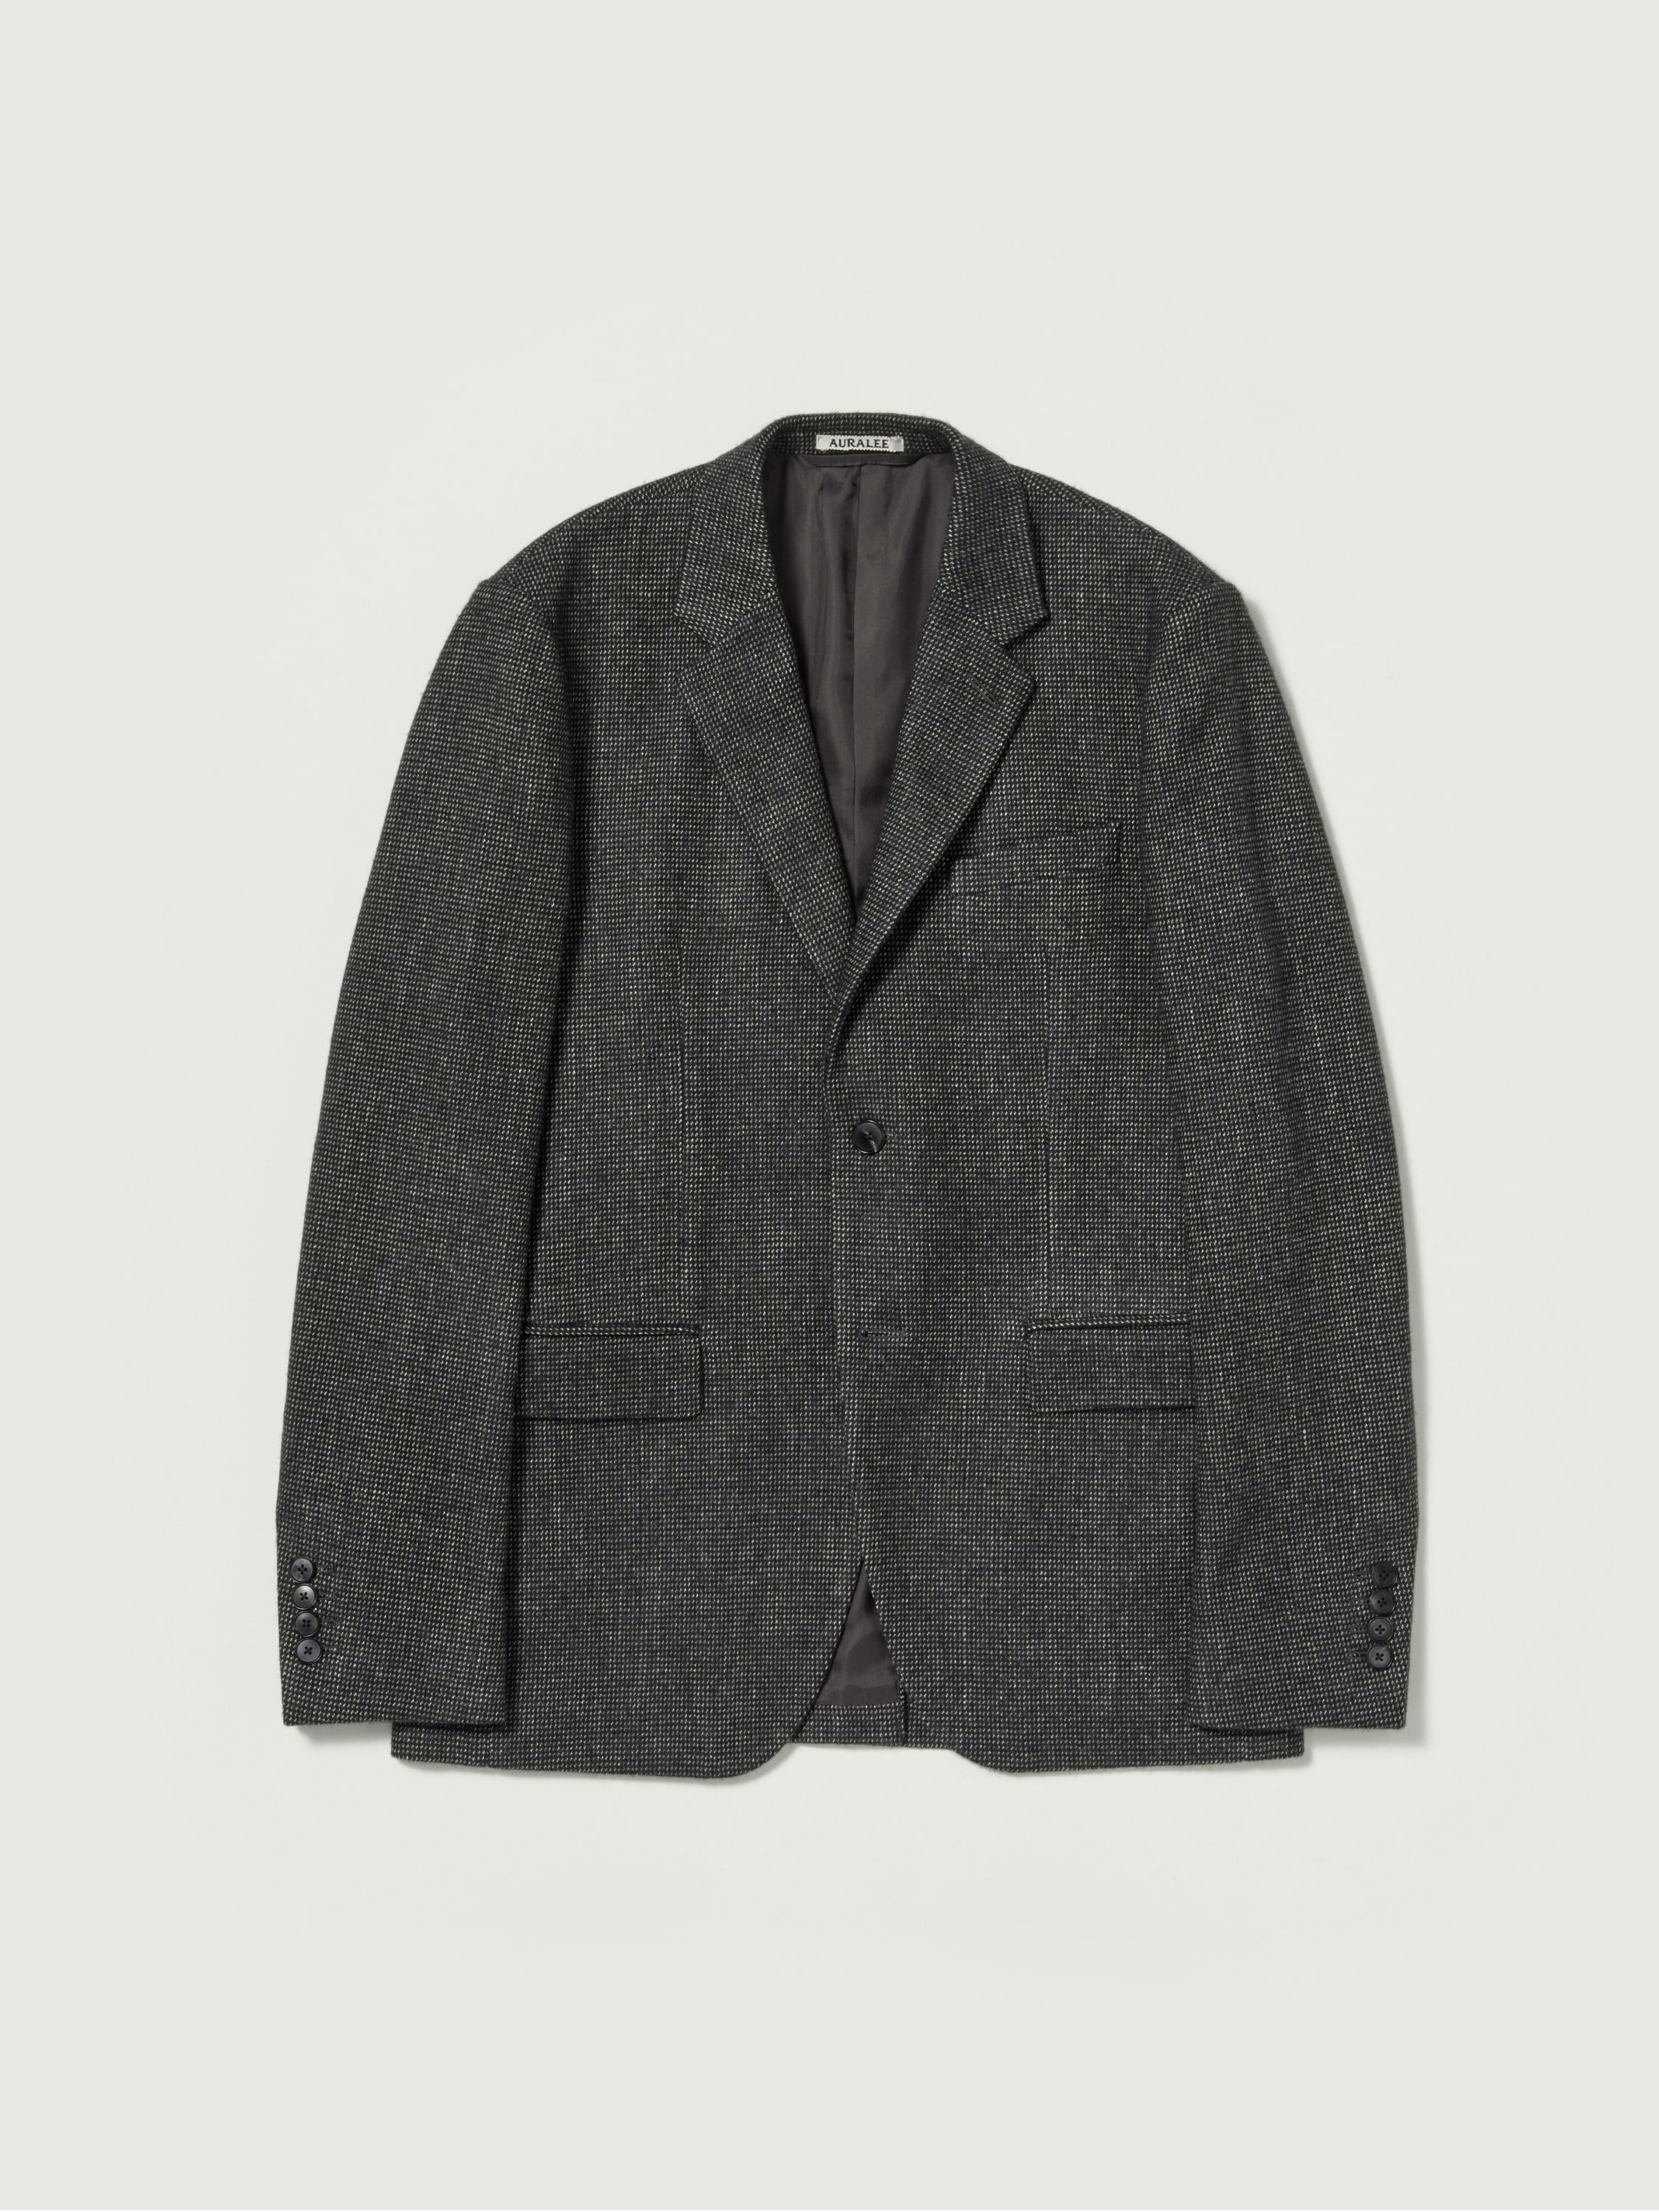 ORGANIC COTTON CASHMERE WOOL TWEED JACKET 詳細画像 TOP CHARCOAL 6